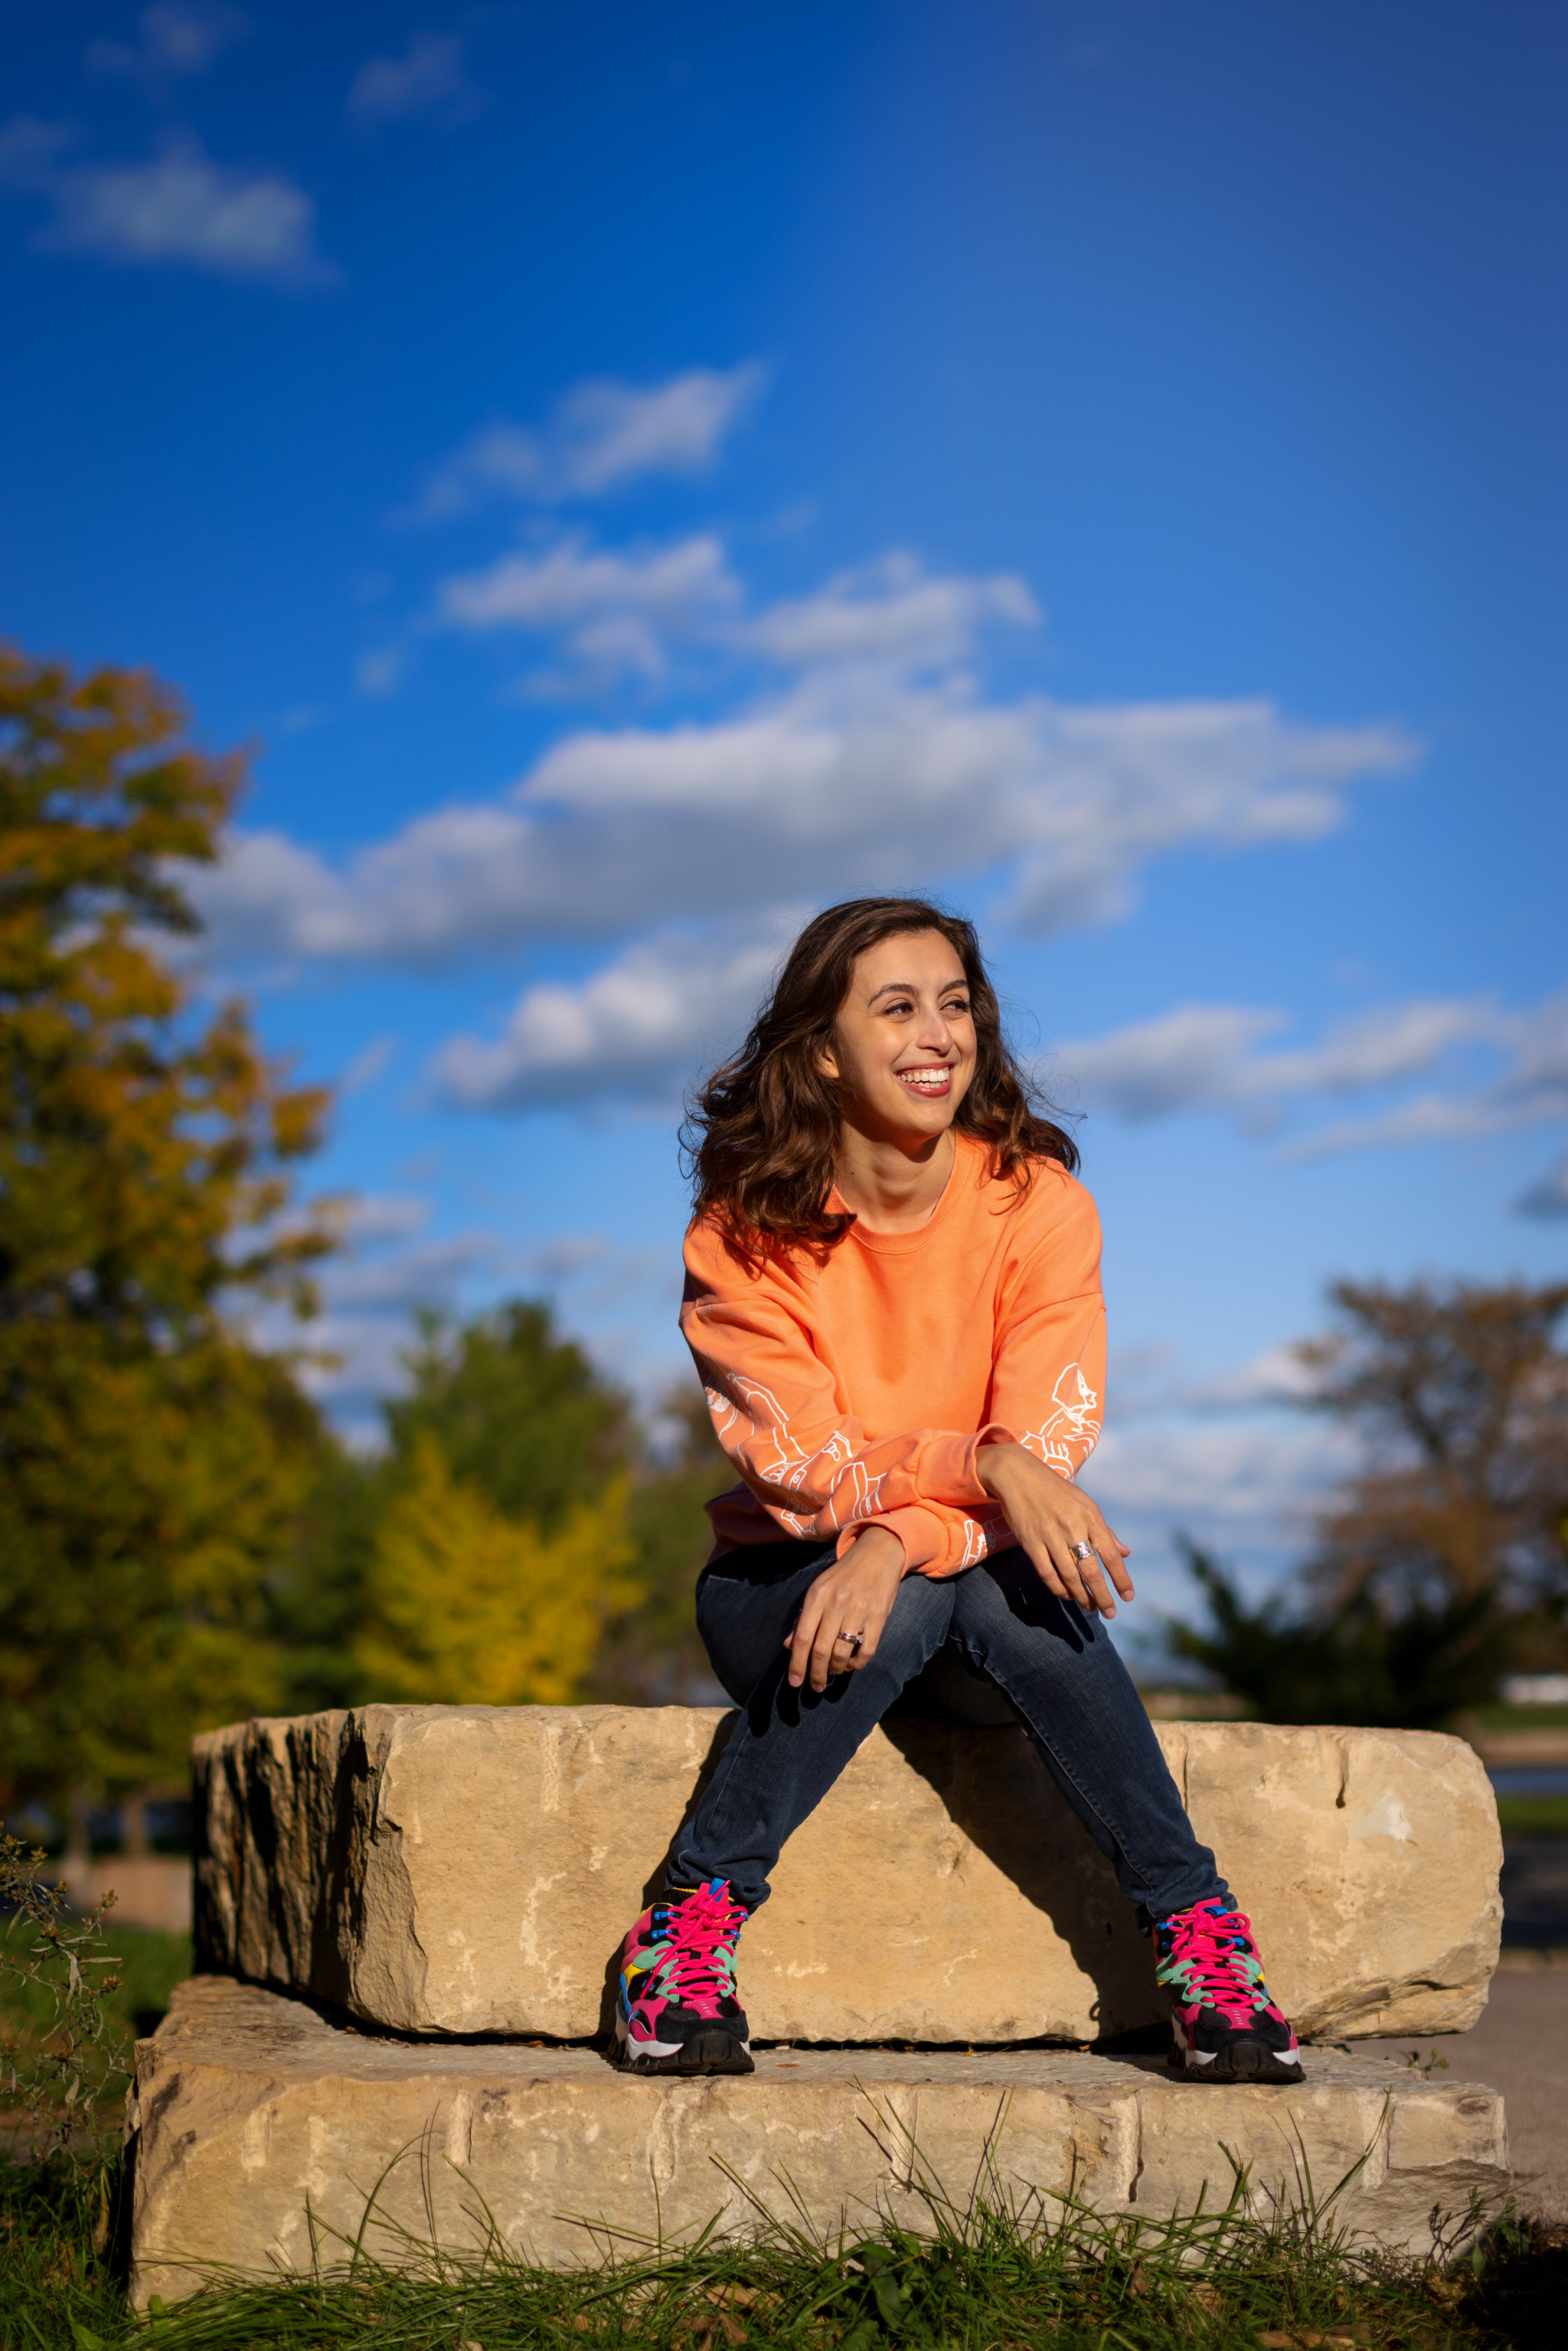 Author Cassidy sitting under blue skies on a rock outside